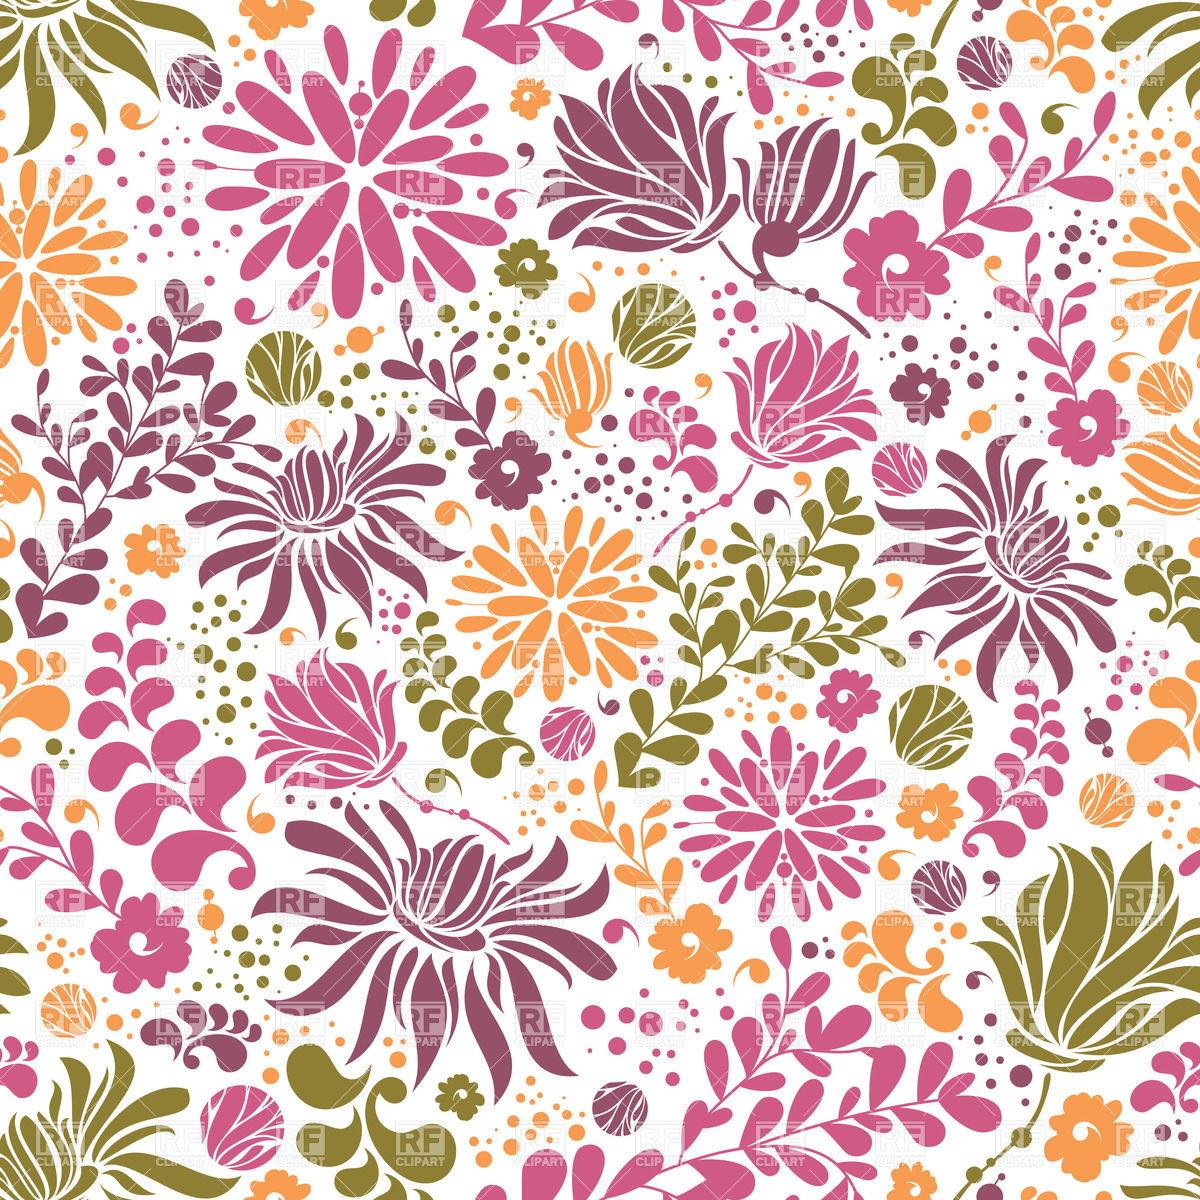 Bright Colorful Floral Pattern Download Royalty Free Vector Clipart